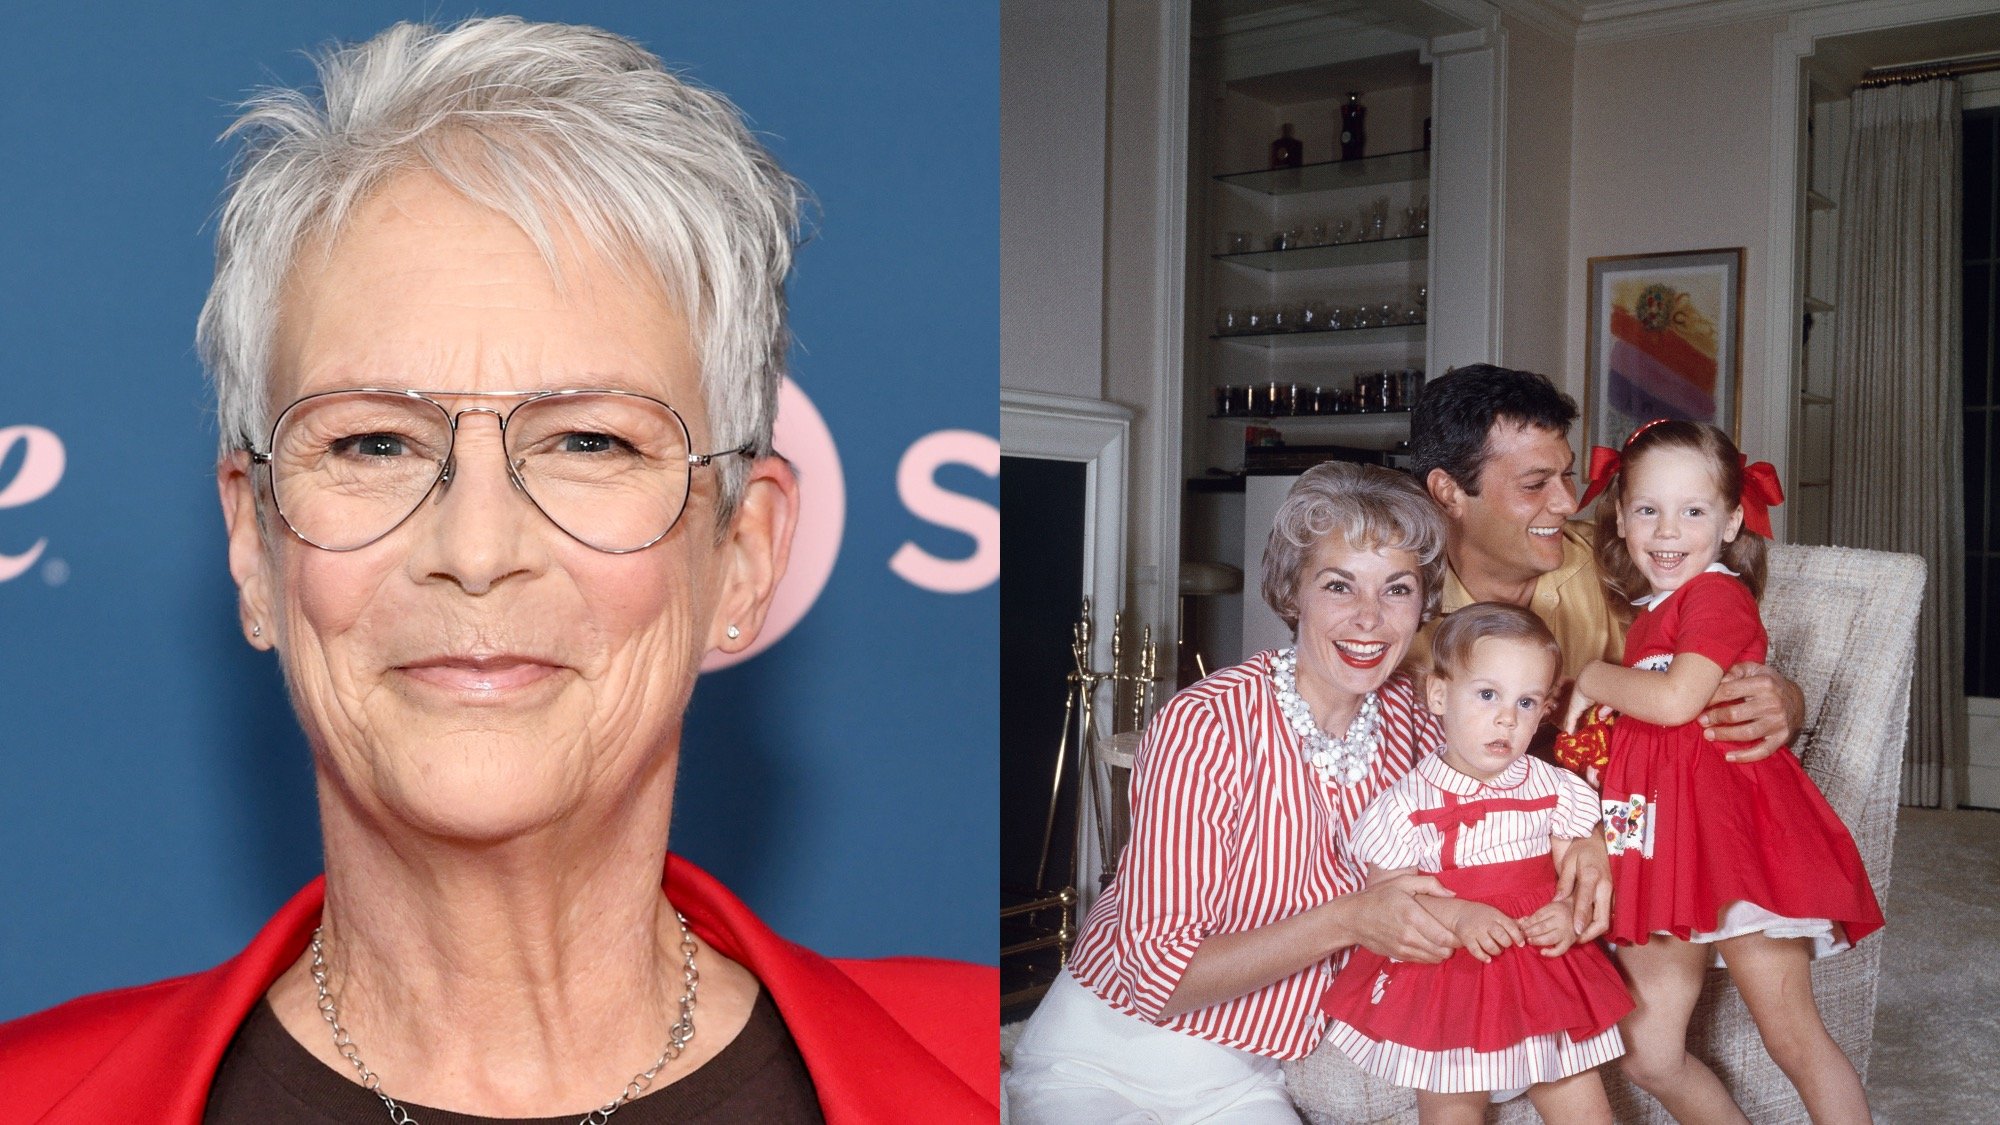 (L) Jamie Lee Curtis attends The Hollywood Reporter's Women In Entertainment Gala presented by Lifetime on December 07, 2022. (R) Tony Curtis and Janet Leigh with their two daughters, Jamie Lee and Kelly Lee.